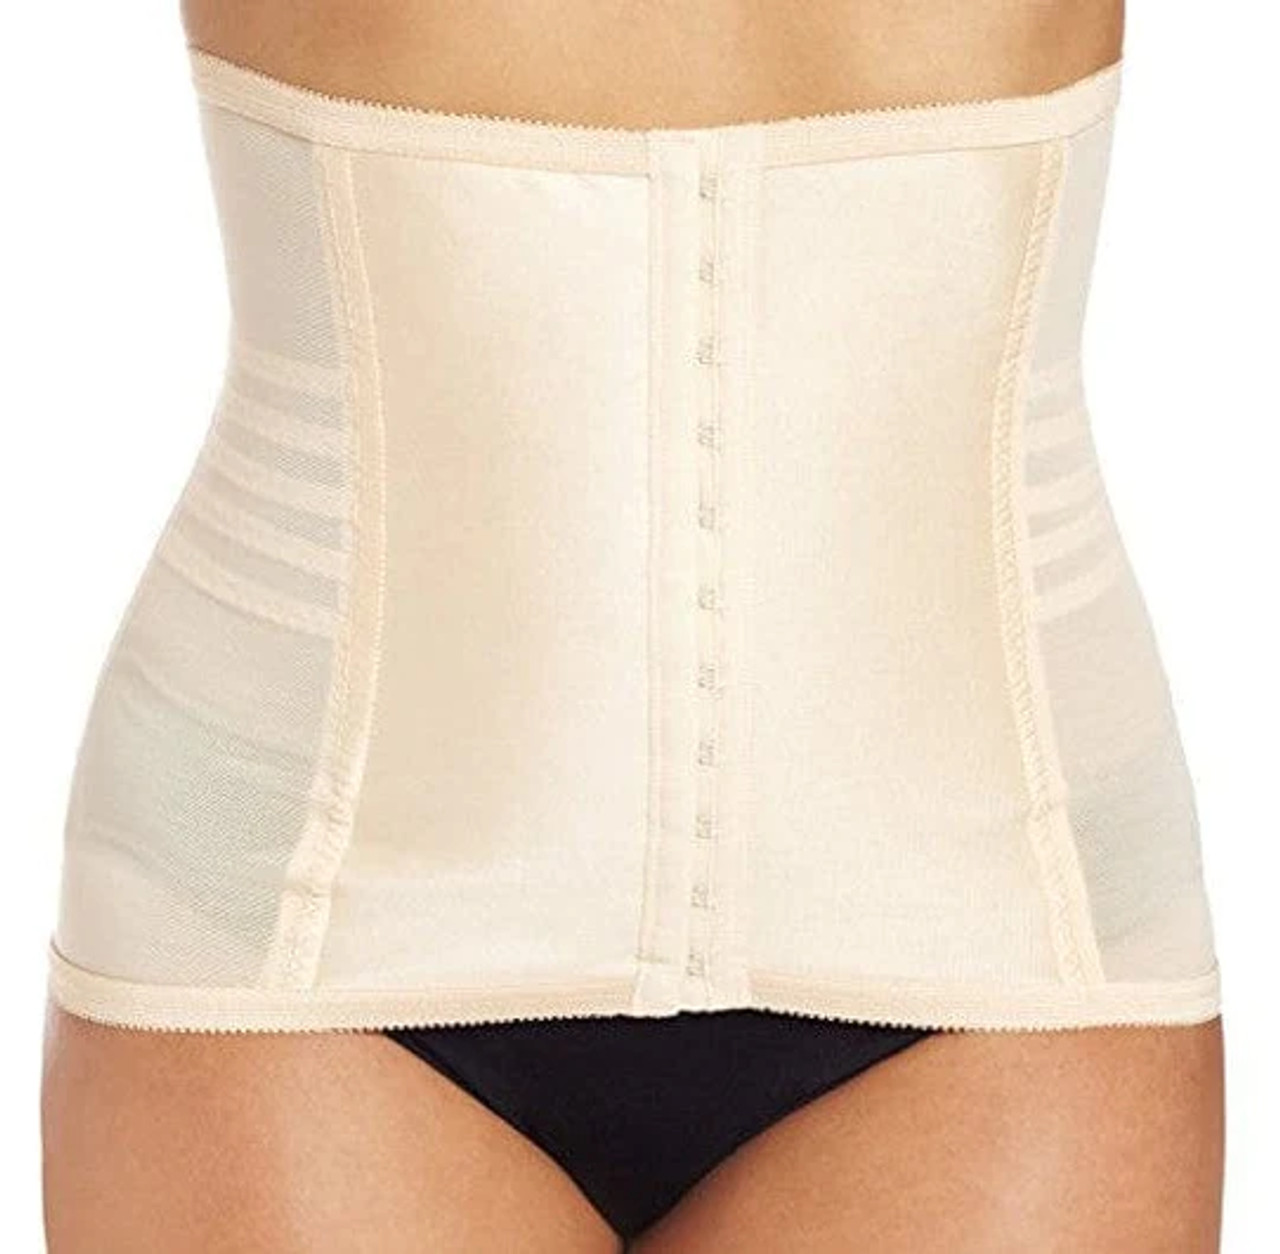 Elegant White All-in-One Girdle with Rear Satin Panel